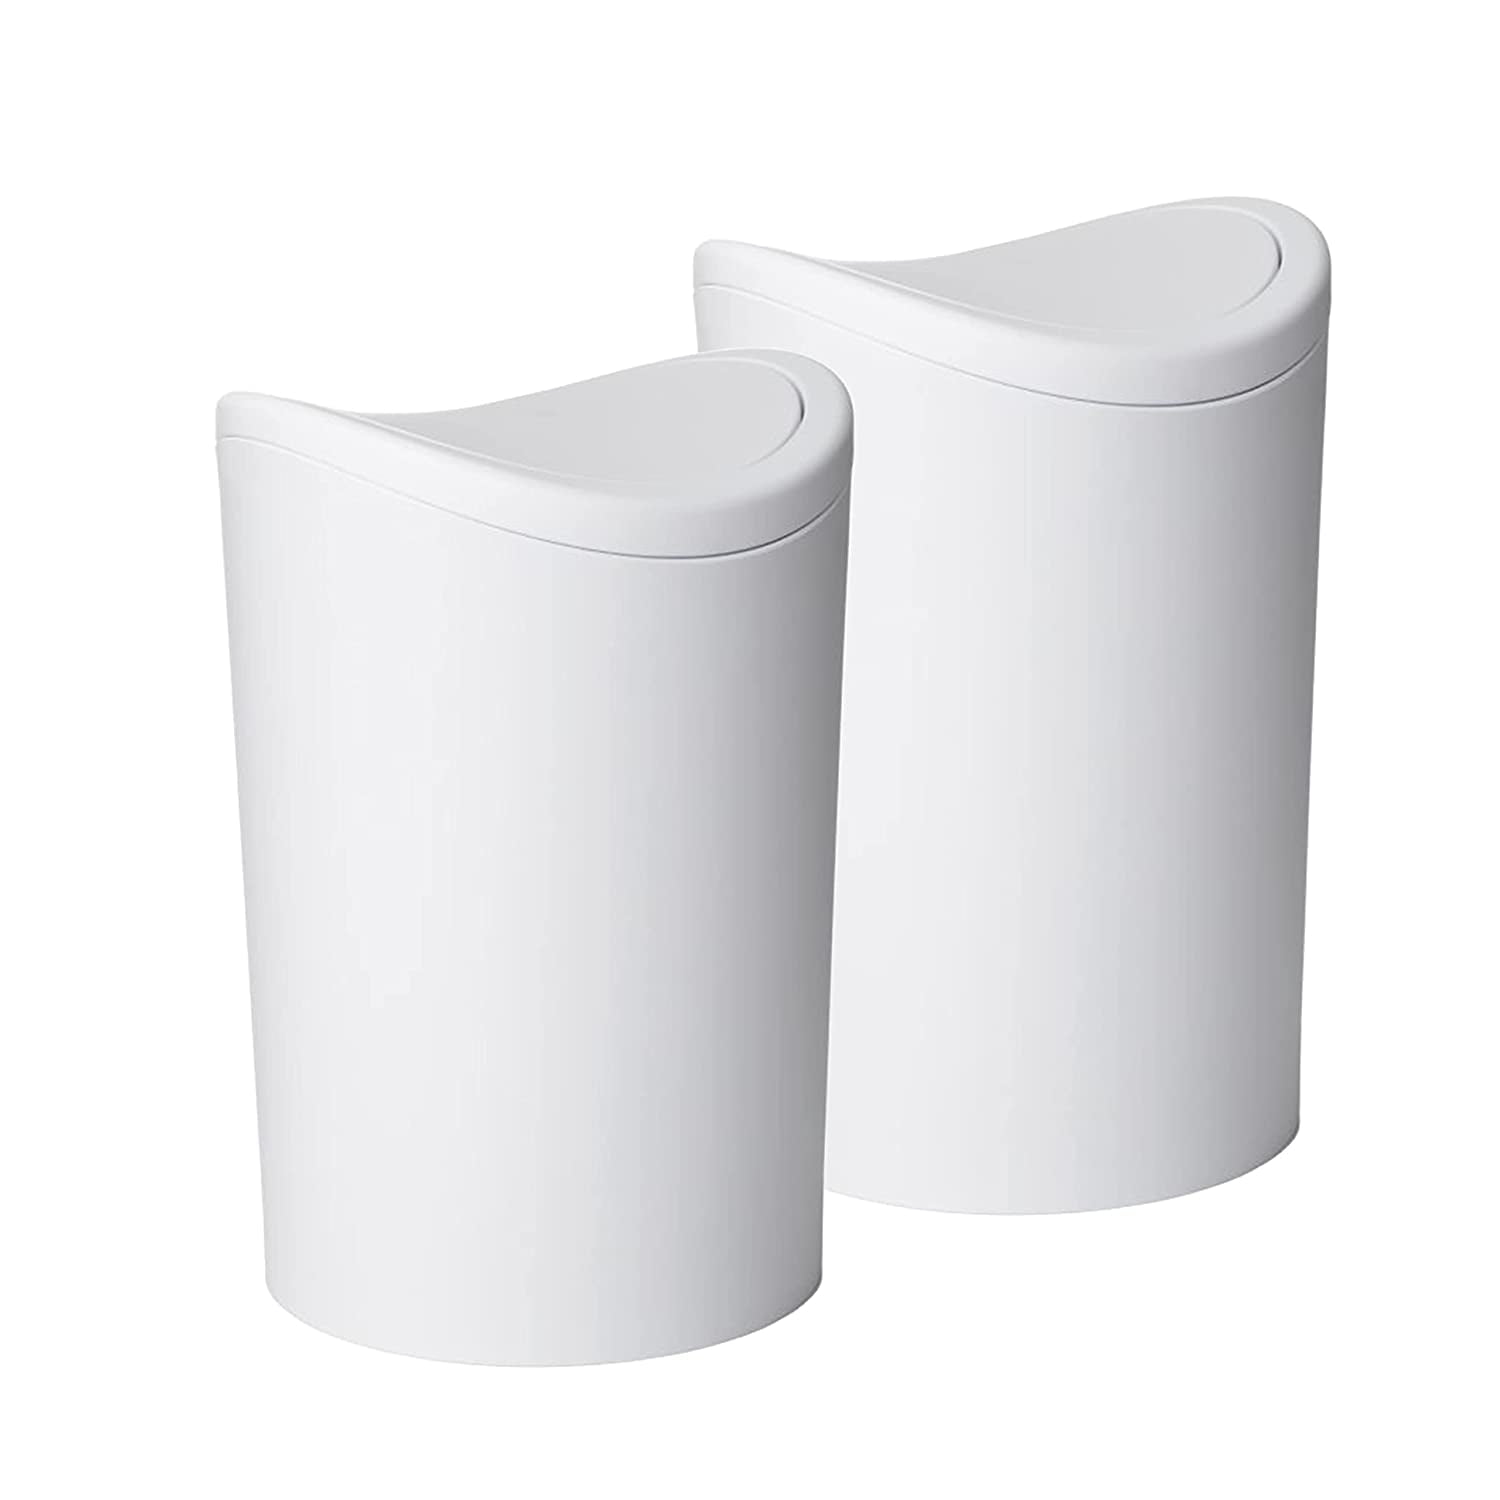 XUXRUS Bathroom Small Trash Bags 3 Gallon Garbage Bags for Home Office,120  Count,White,Fits 2-3 Gallon Bins